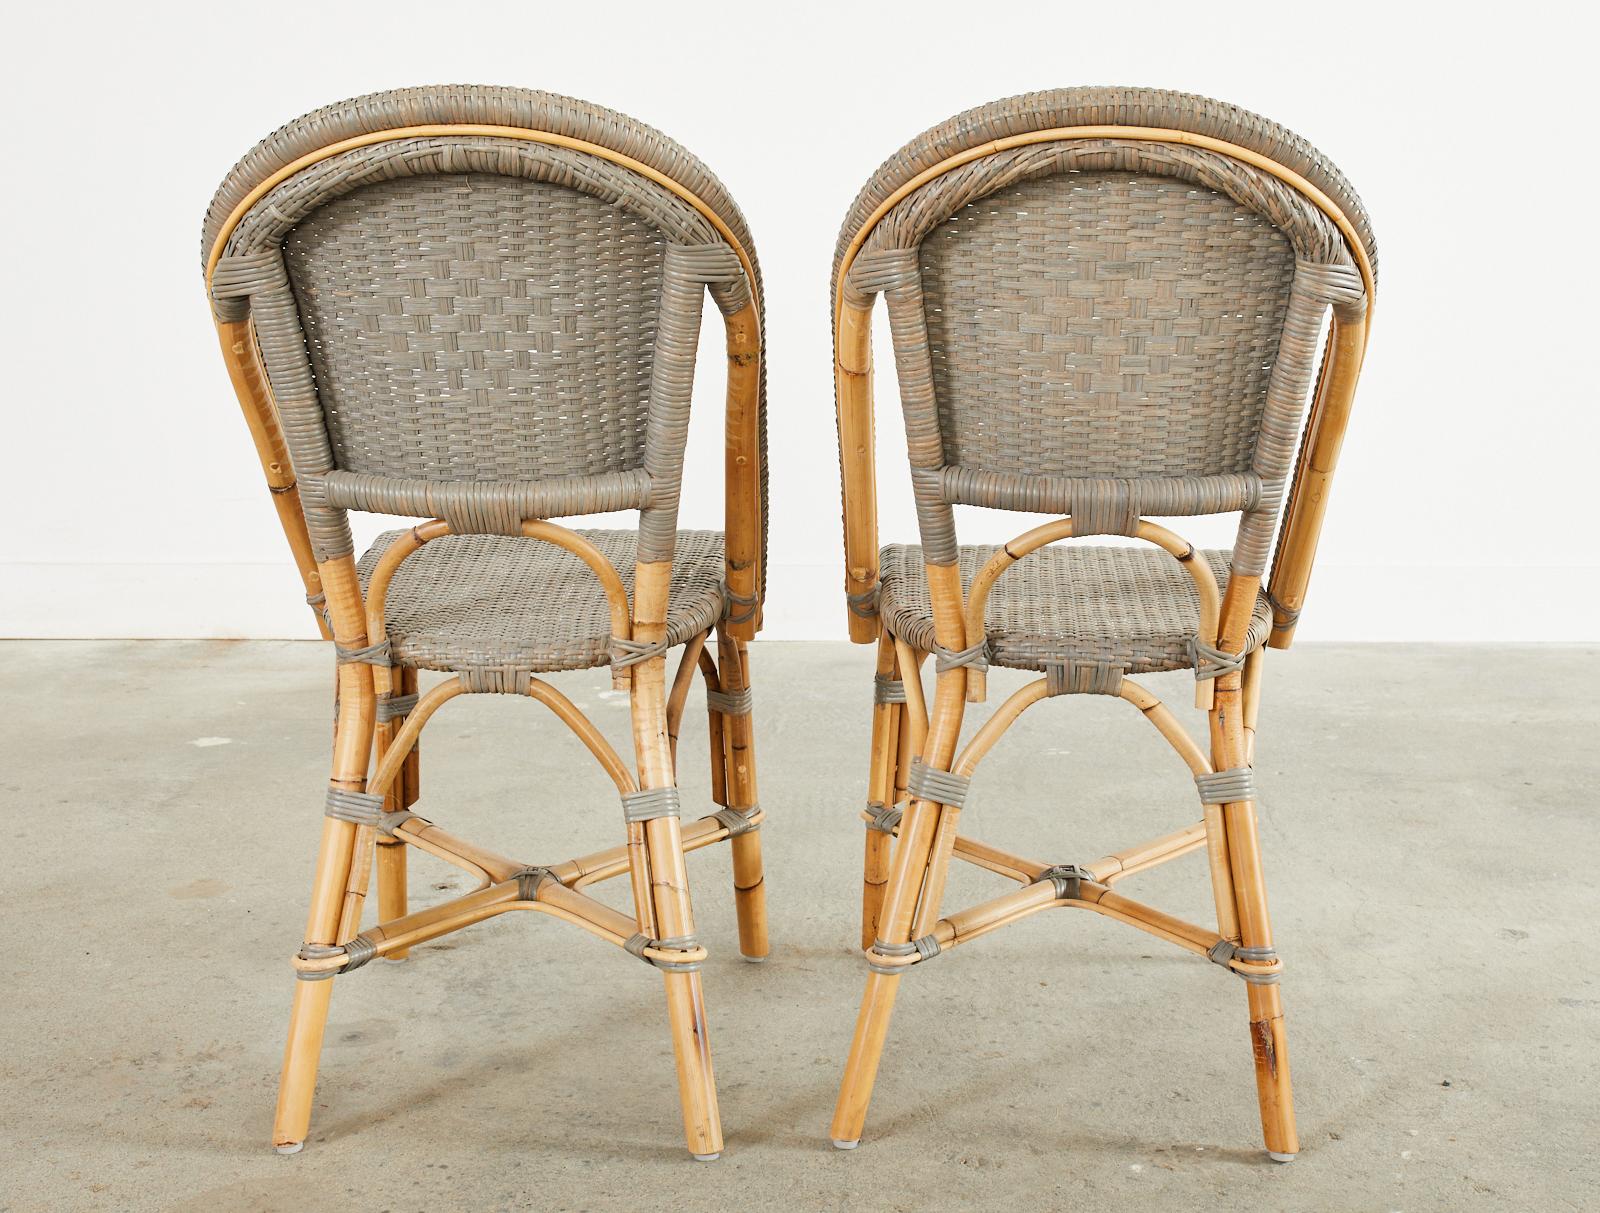 Set of Forty Serena and Lily Rattan Wicker Bistro Dining Chairs 1